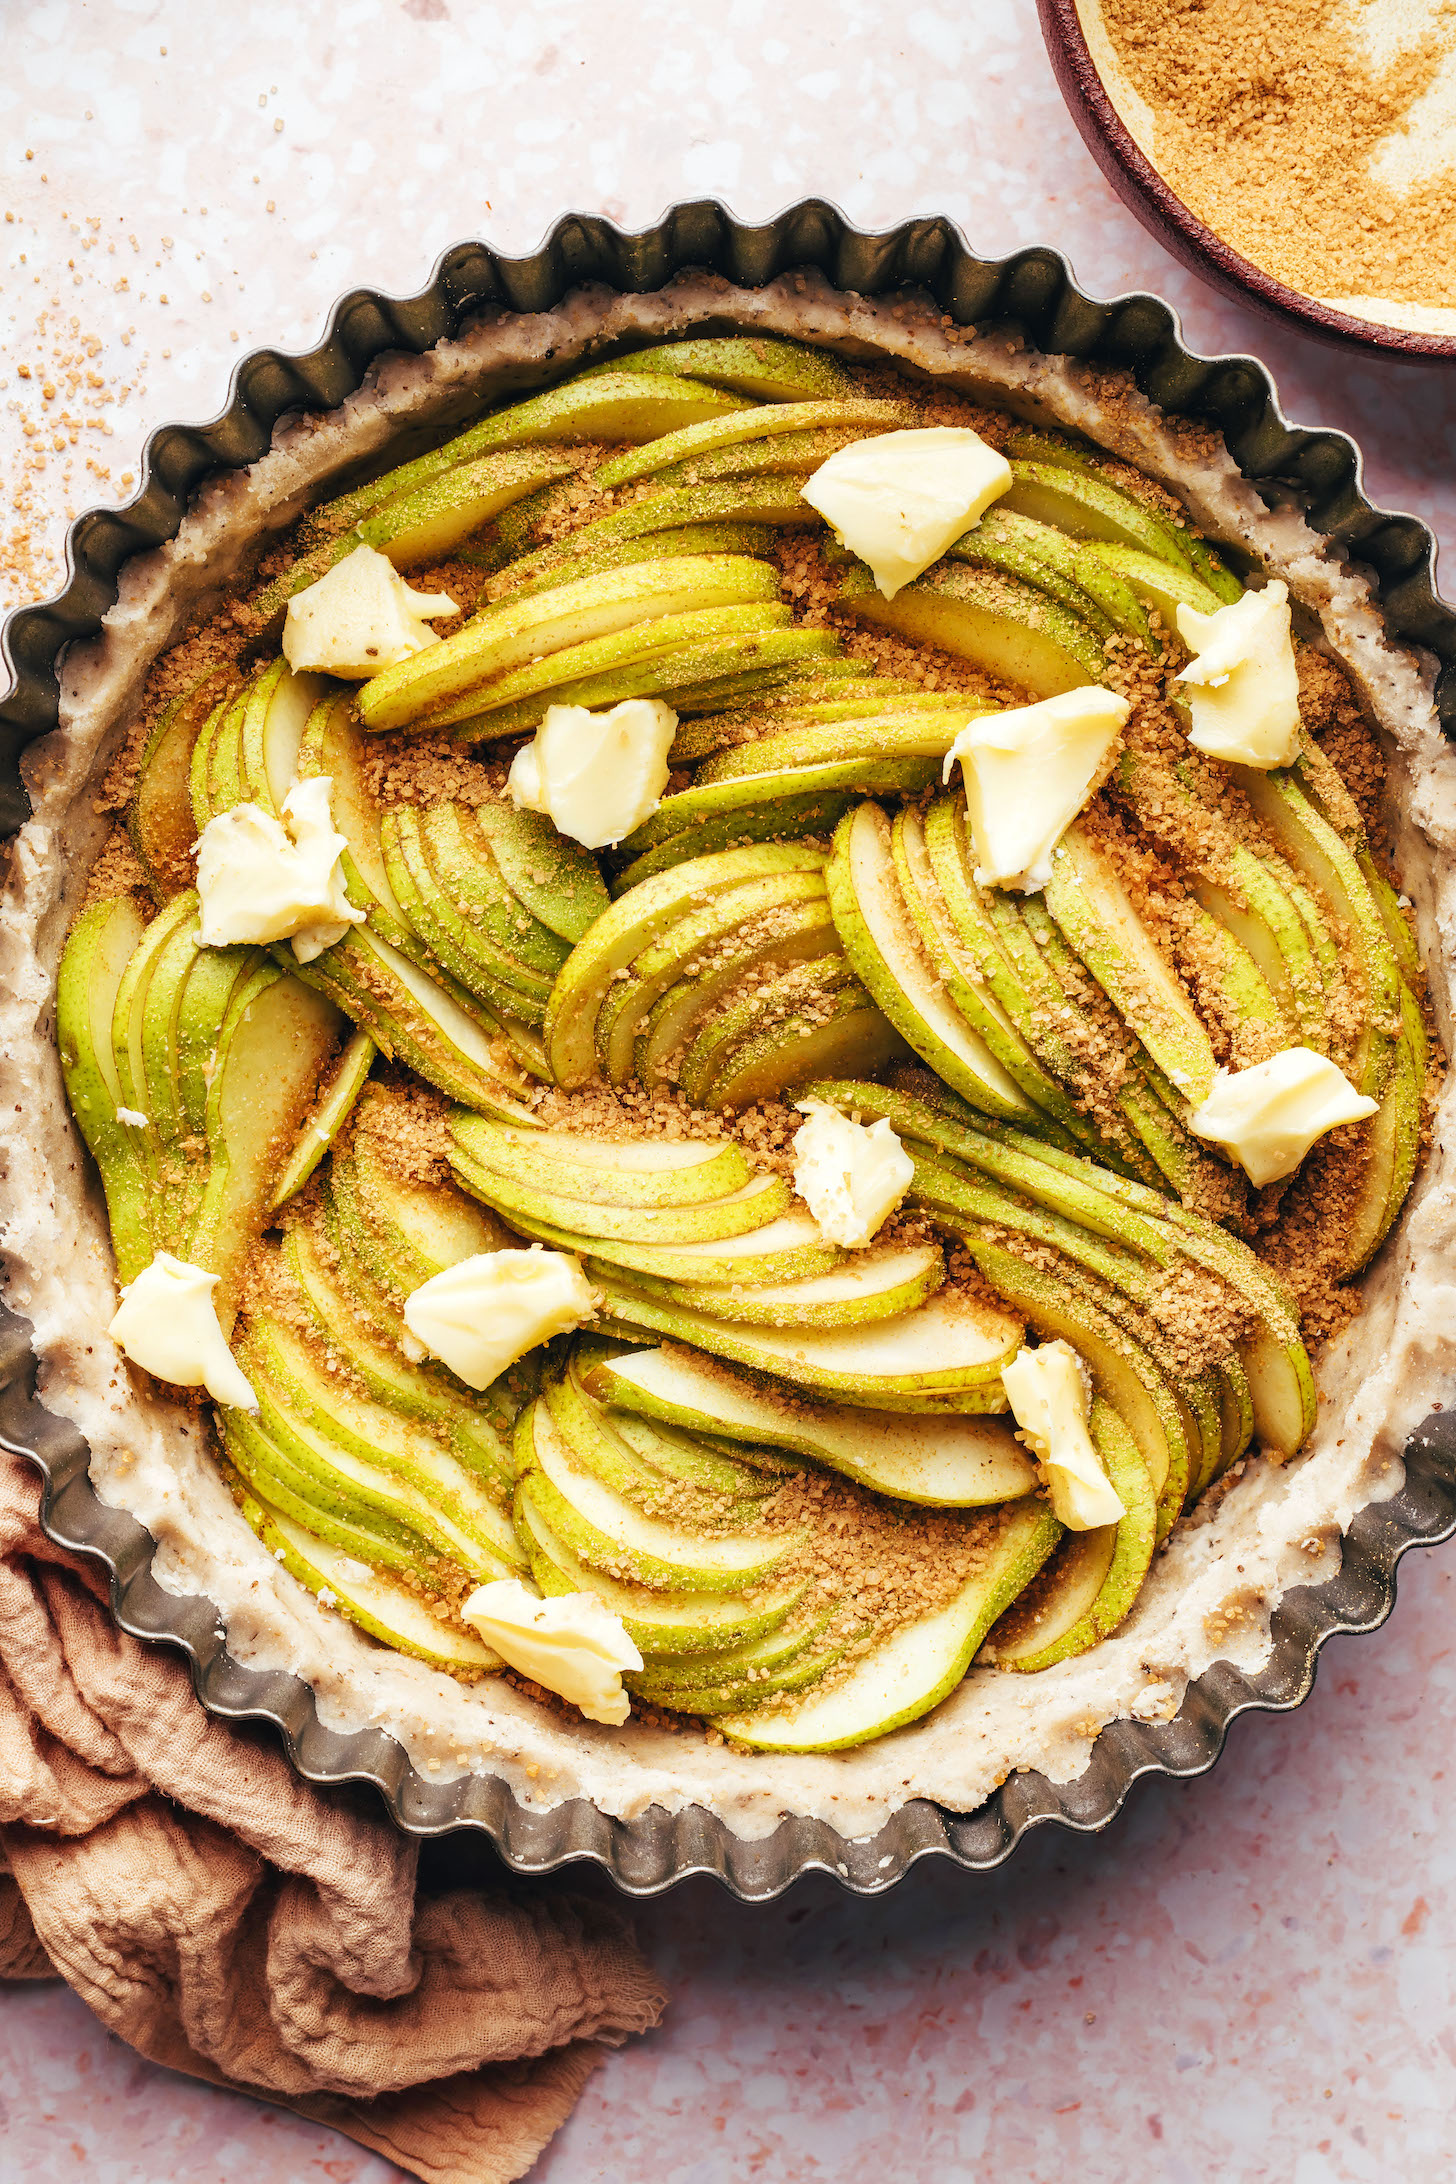 Sliced pears, vegan butter, and brown sugar over a crust in a tart pan